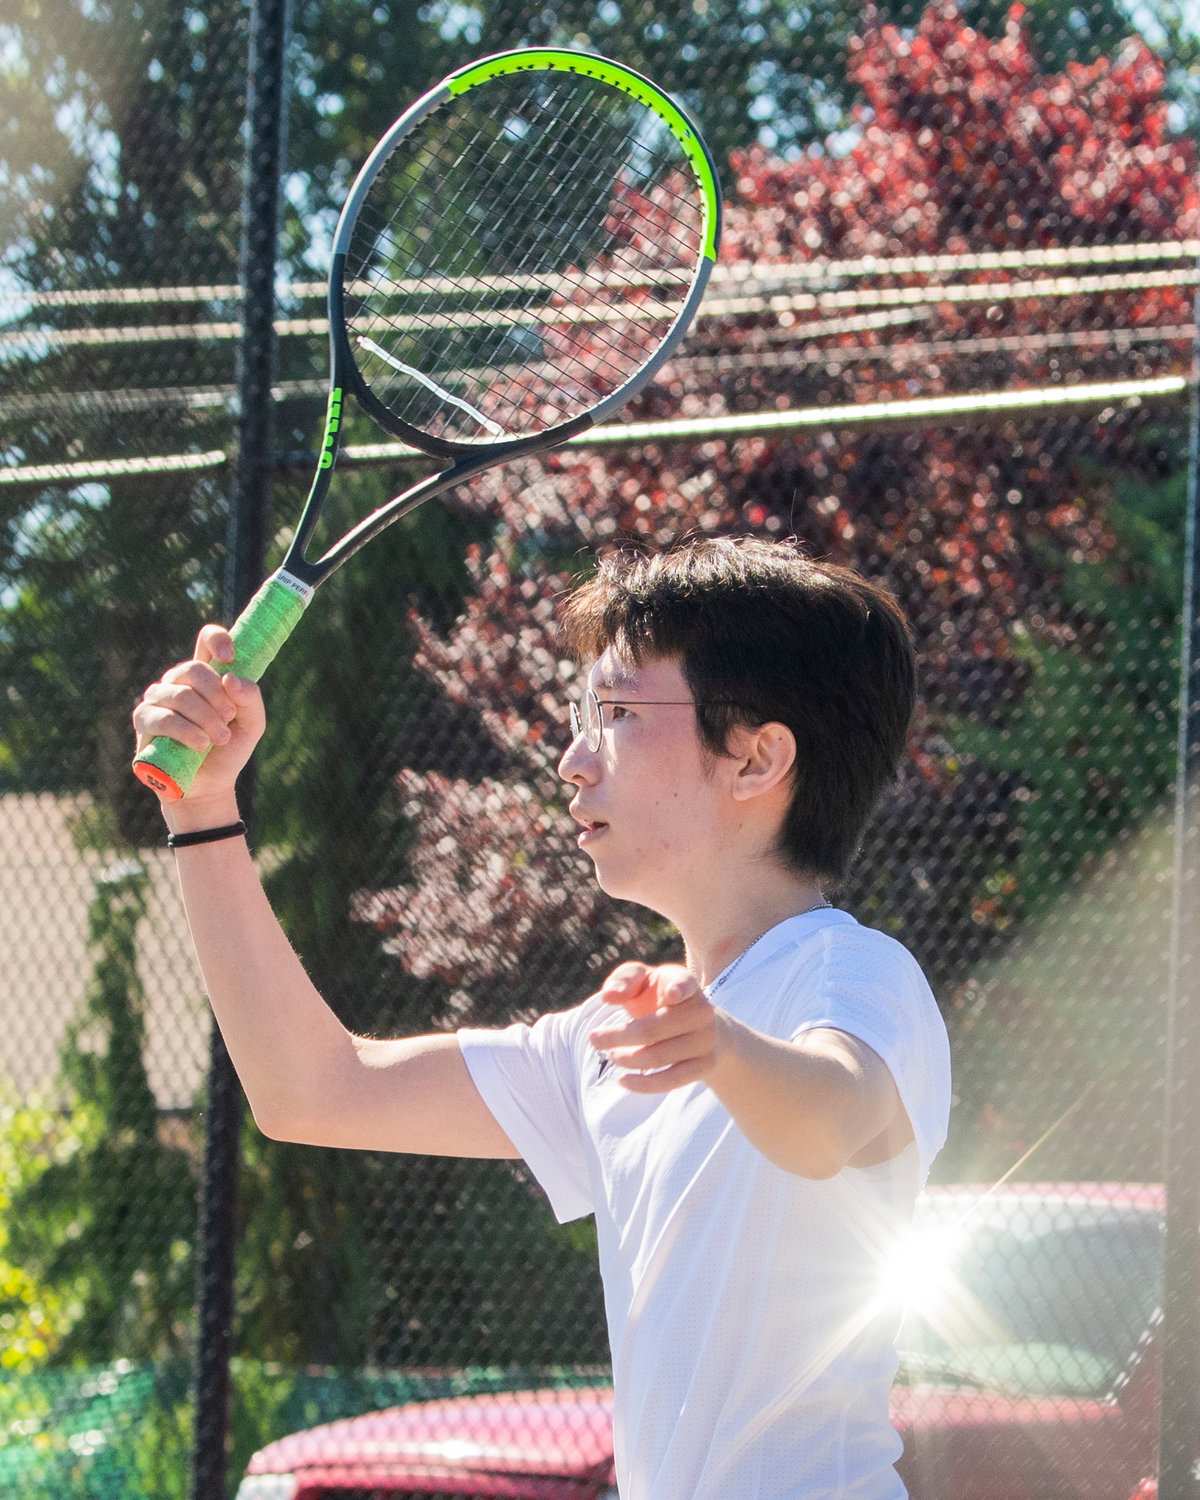 Andrew Pak, a W.F. West graduate, swings his racket during the Jack State Tennis Tournament at W.F. West High School on Saturday.